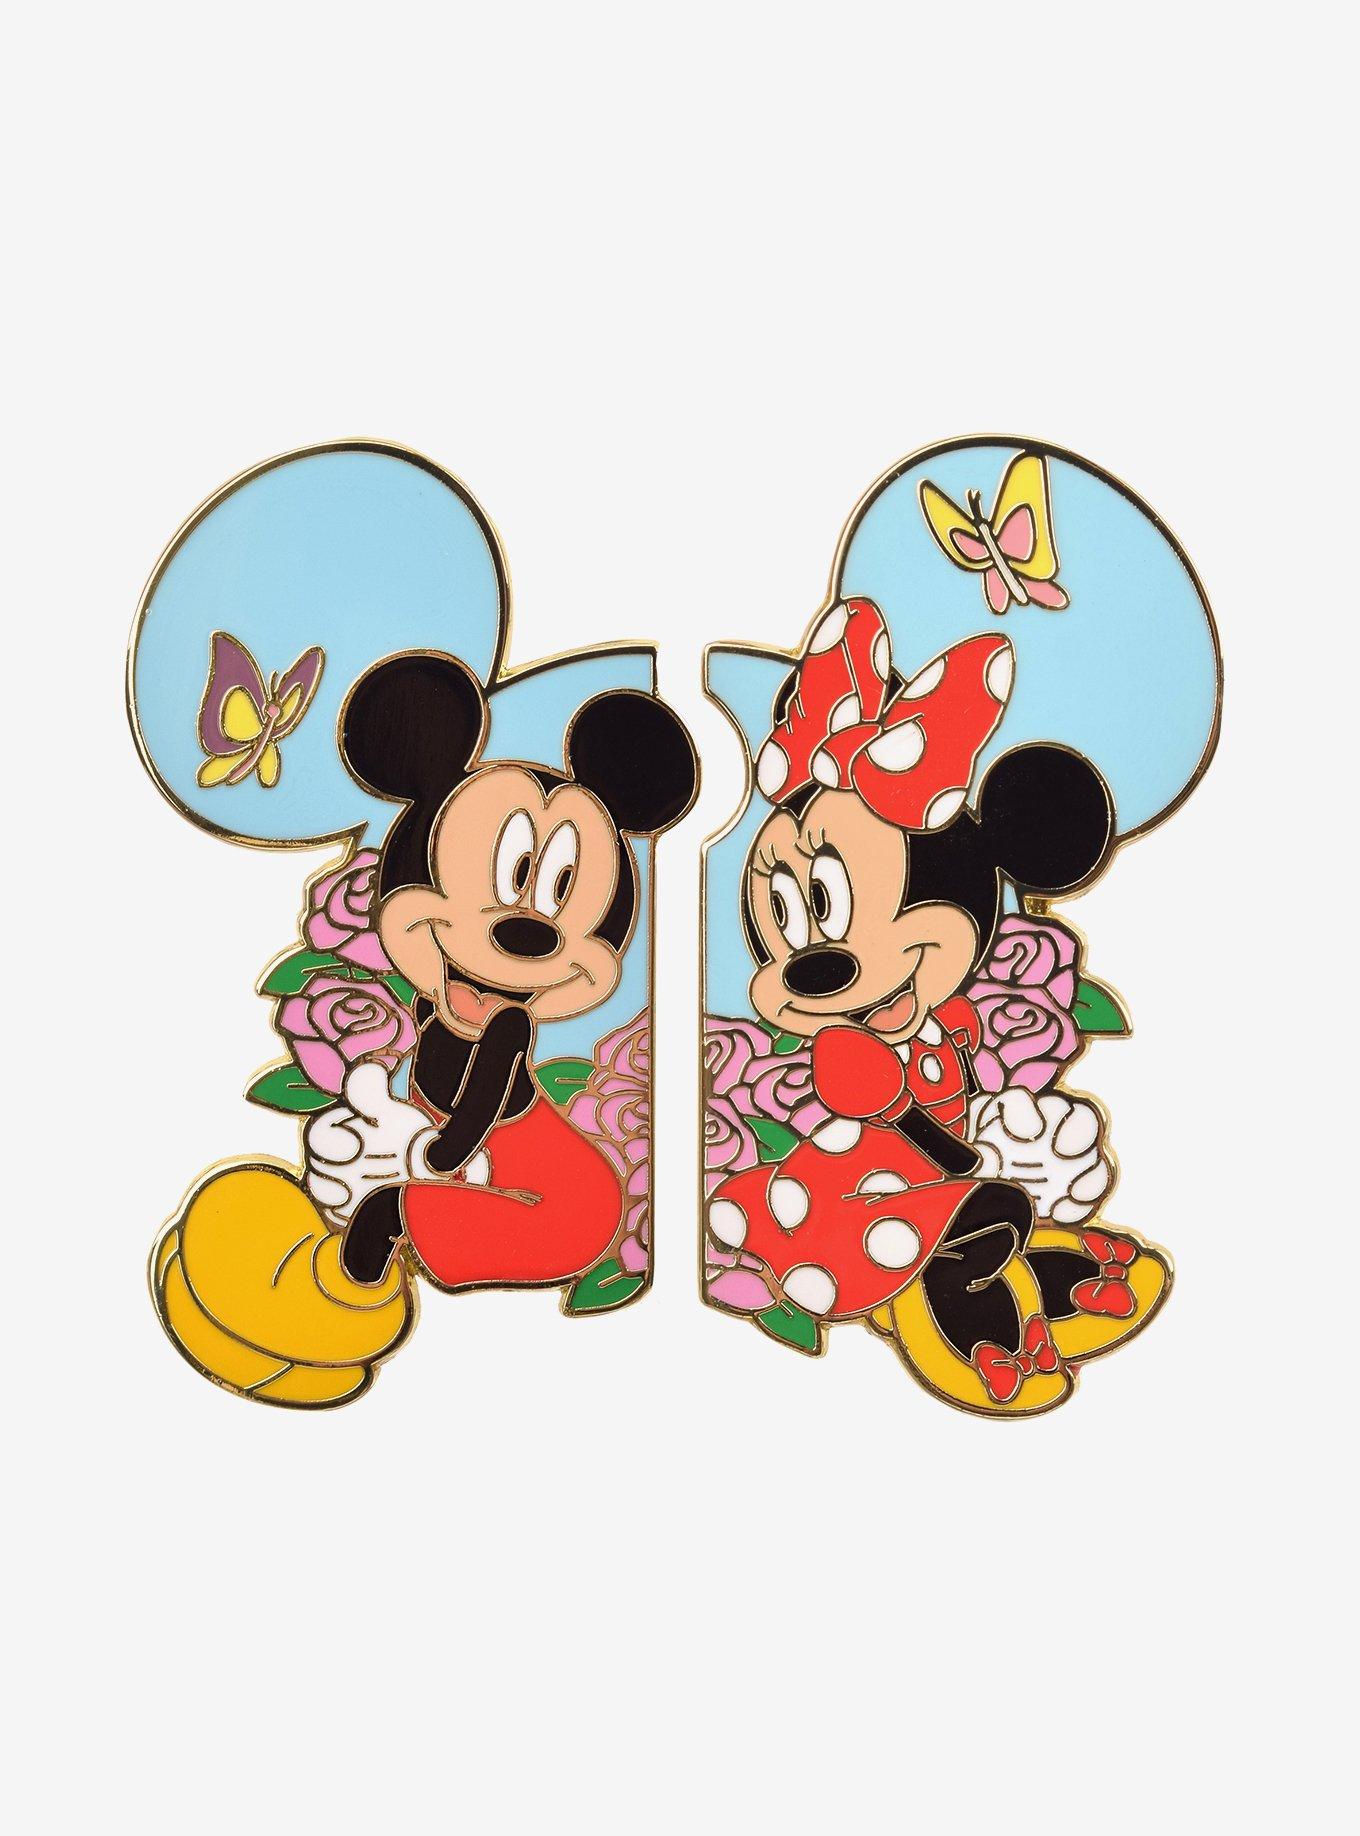 Minnie Mouse Pins Pin Back Buttons Mickey Disney Pin Set